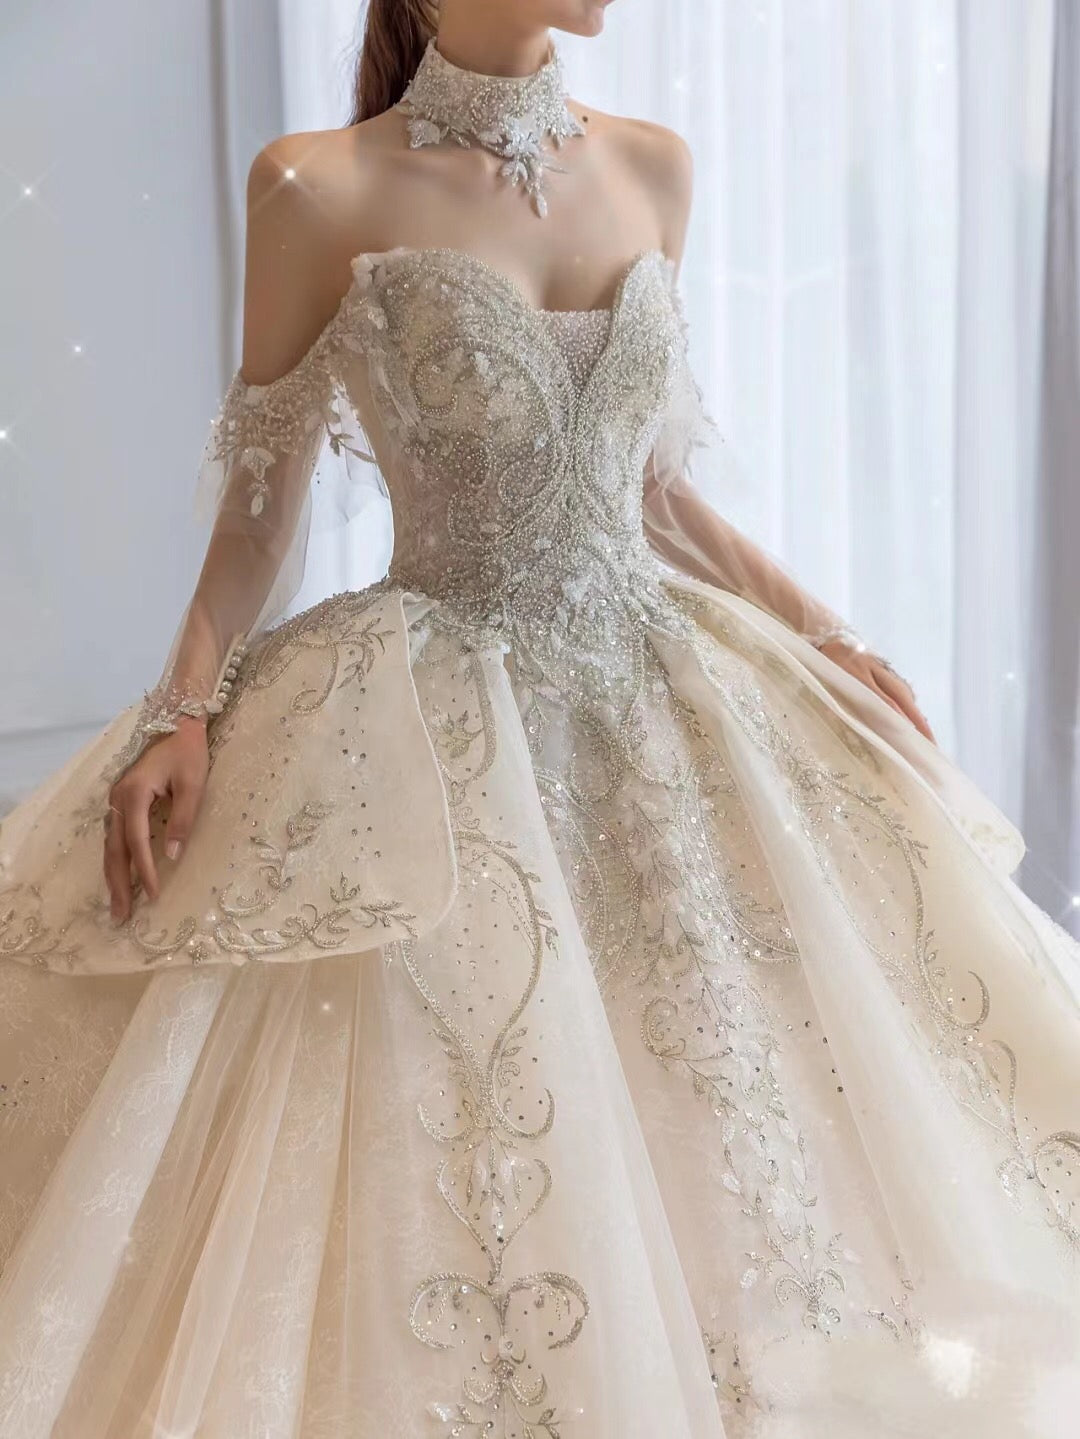 Luxury Quality Beaded Wedding Dresses, Off Shoulder Lace A-line Bridal Gowns